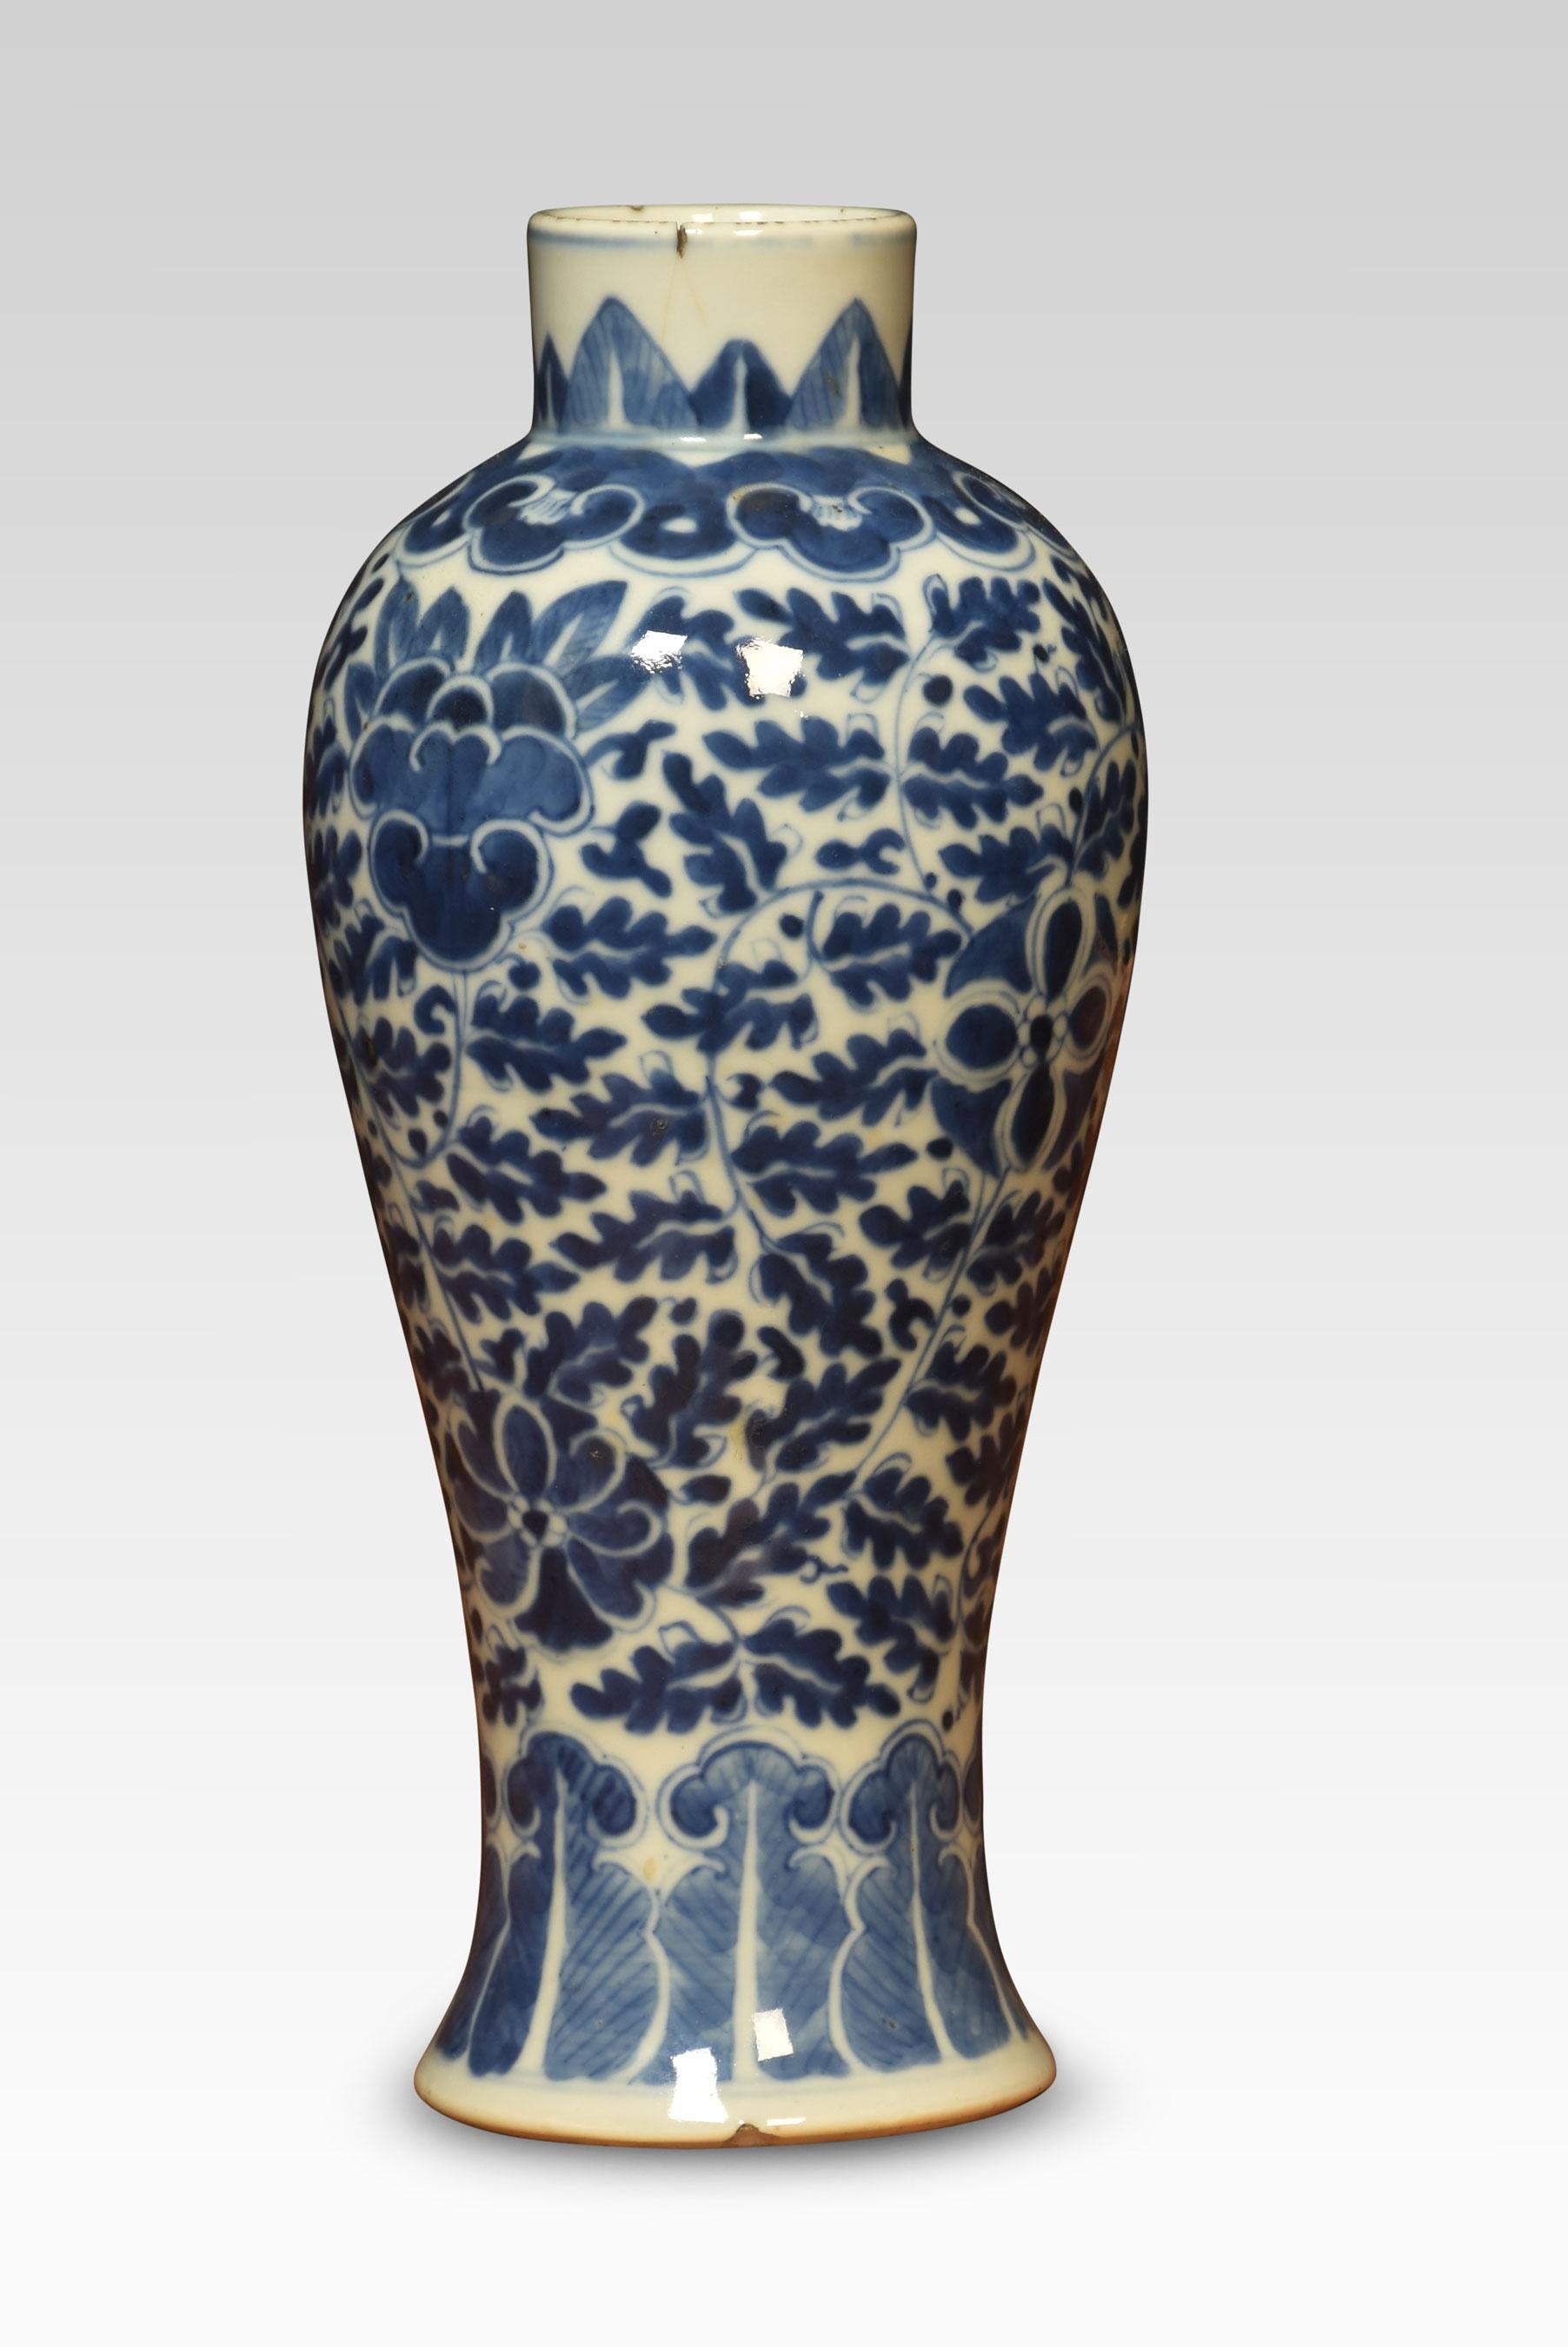 19th-century blue and white porcelain vase with leaf decoration on a circular base with some chips to the rim.
Dimensions
Height 10 Inches
Width 4 Inches
Depth 4 Inches